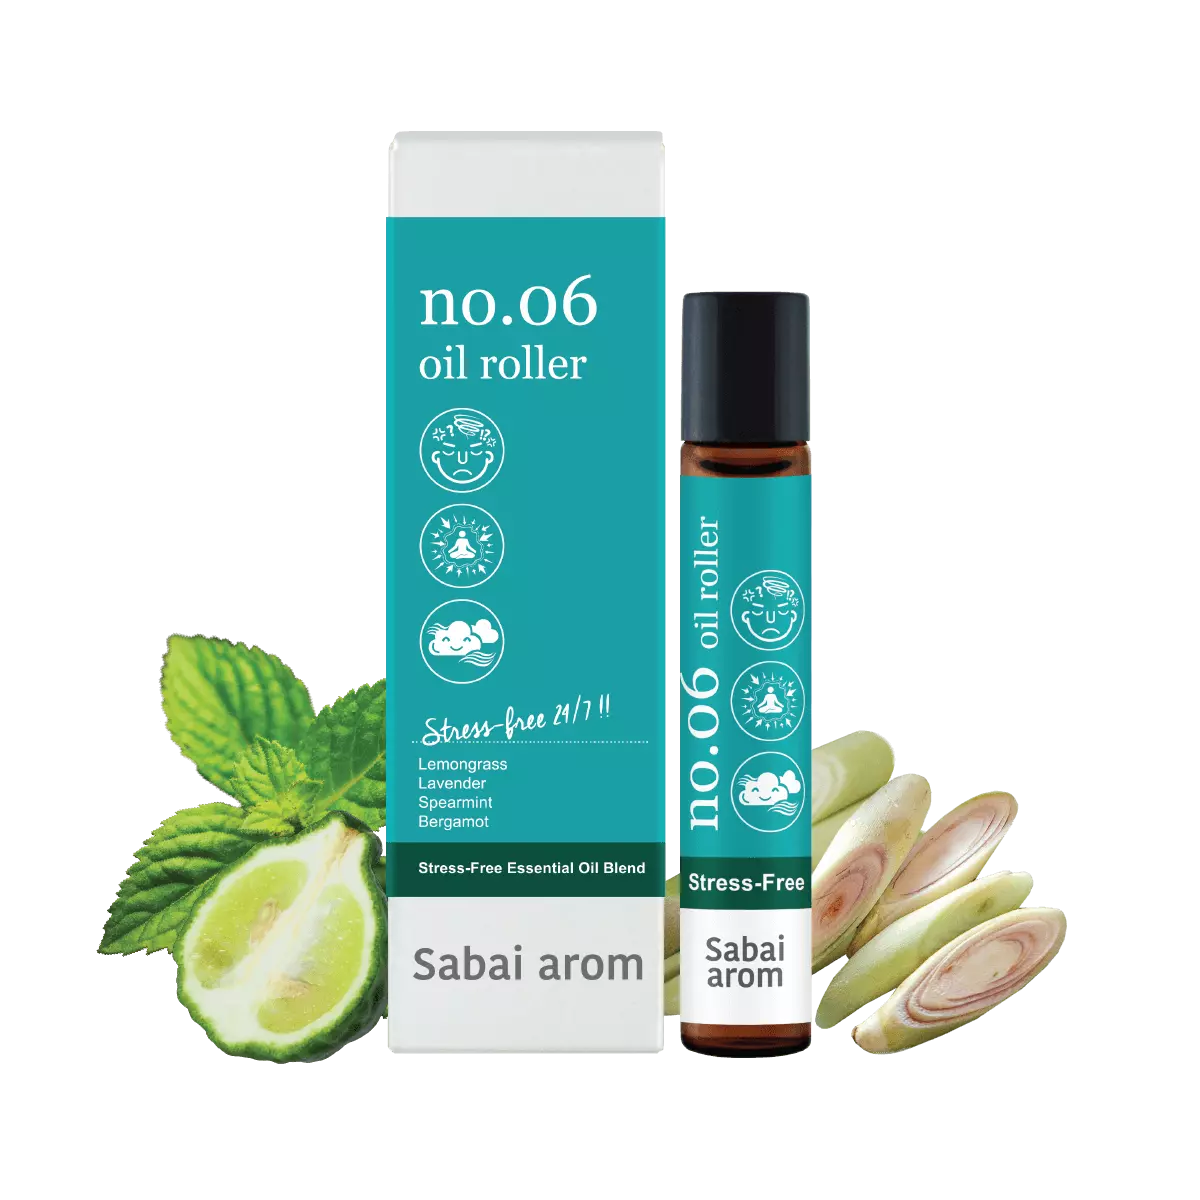 oil roller no06 <h2>No.6 Oil Roller is a super blend to pop in your pocket,</h2> little pocket or close at hand just when you need something to instantly banish the cloud of tension fogging up around you. It contains therapeutic power of pure essential oils from Lavender, Ylang, Ylang, Chamomile, Eucalyptus, Bergamot and Orange in a conveniently carry-away sizing. <strong>Scent</strong> : The spontaneous refreshing of Mints and Bergamot combined with the deepness of Lavender to instantly untie the bond of tension, making you feel rejuvenated and light-hearted like taking a fine walk among a herbal-floral field on a high mountain.